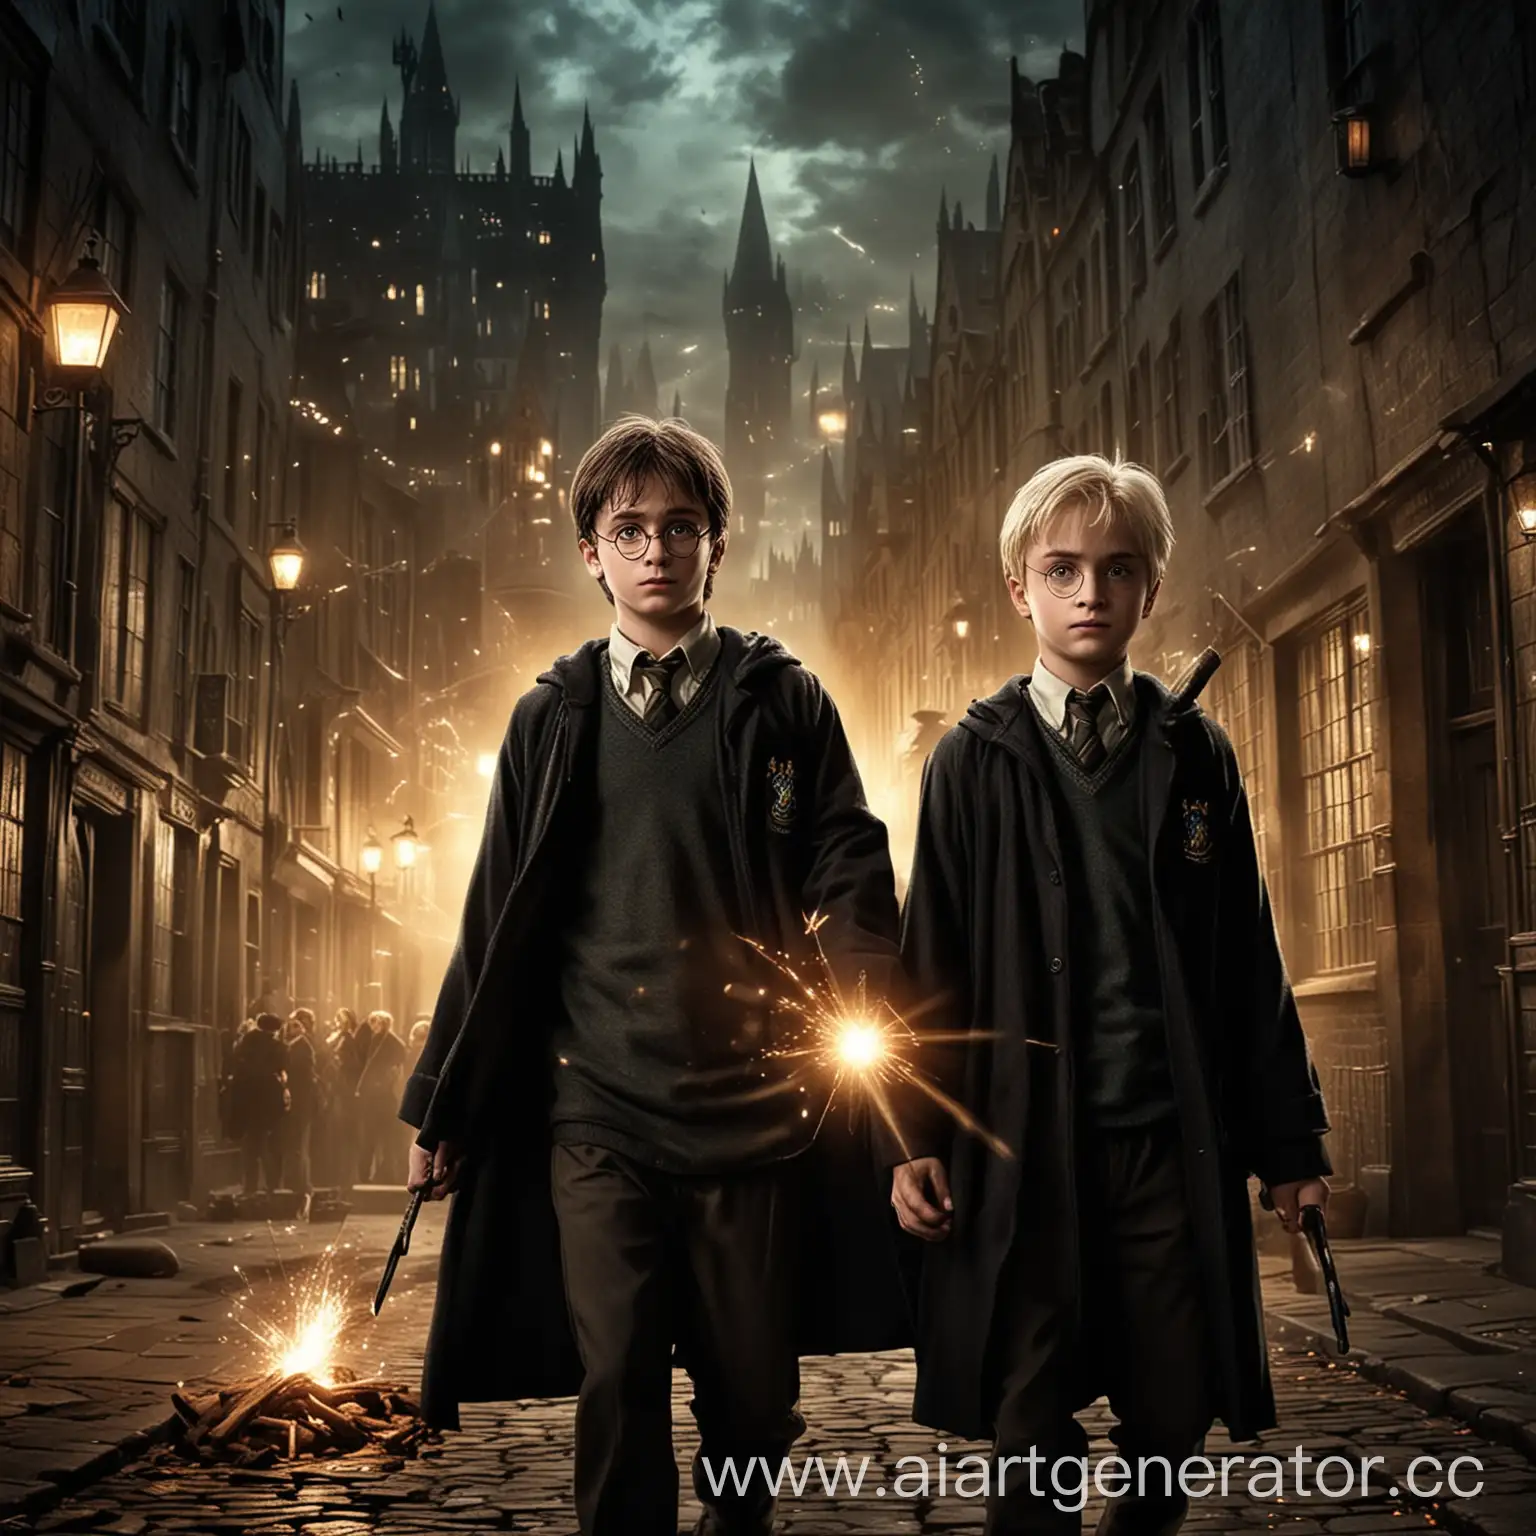 Young-Albus-Potter-and-Scorpius-Malfoy-Facing-Magical-Dangers